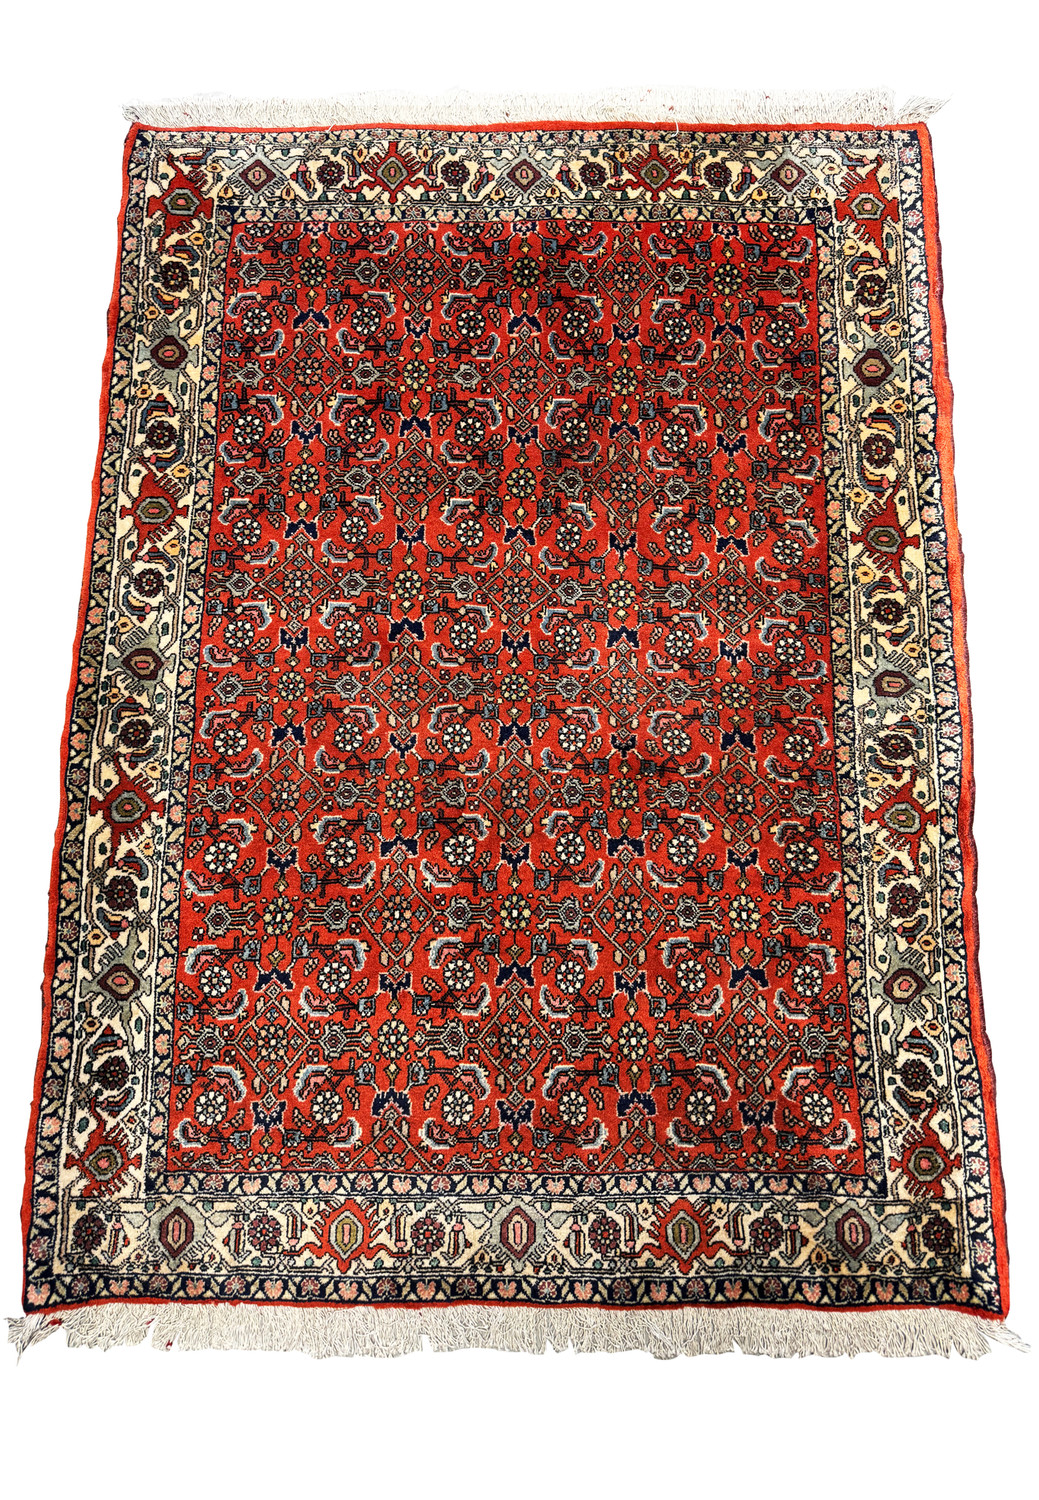 An overall view of a vintage Bijar rug, showcasing its intricate all-over design and vibrant red color.